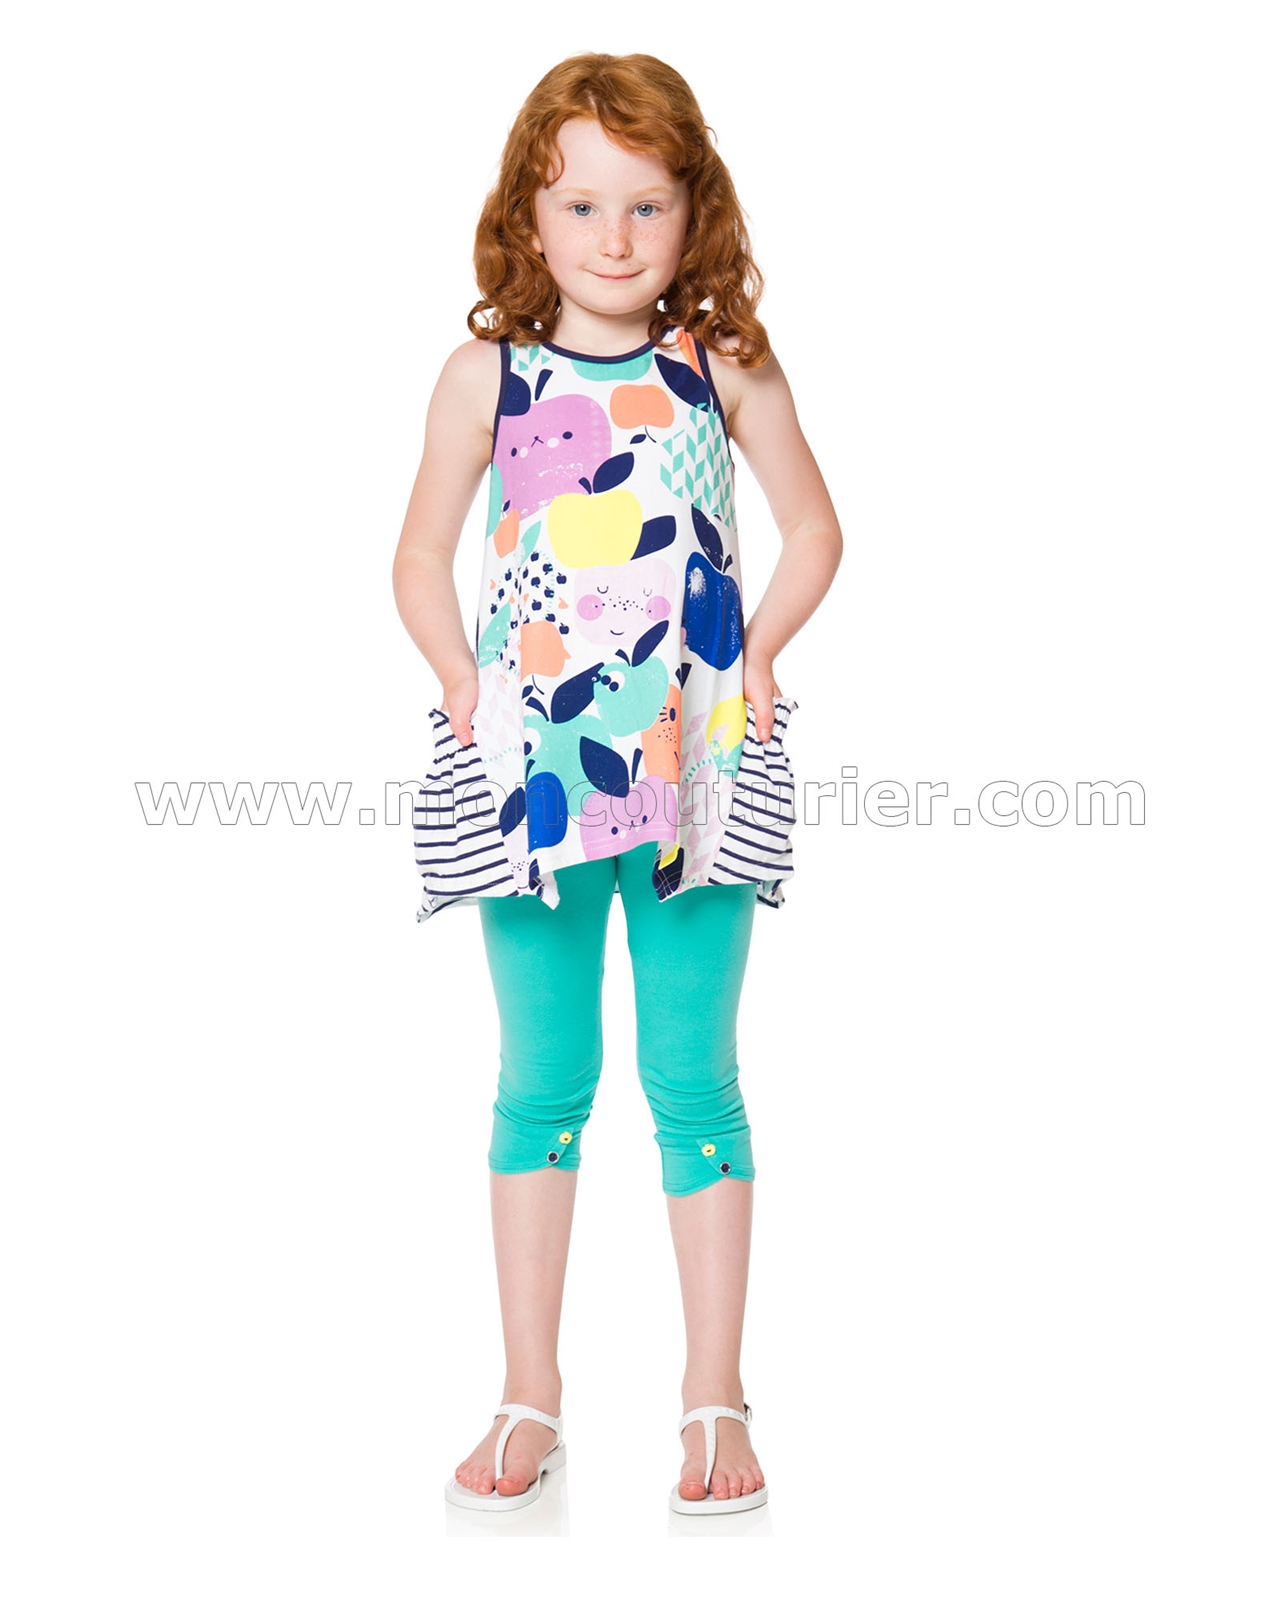 Sizes 6-12 Deux par Deux Girls Tunic in Apples and Pears Print Black and White